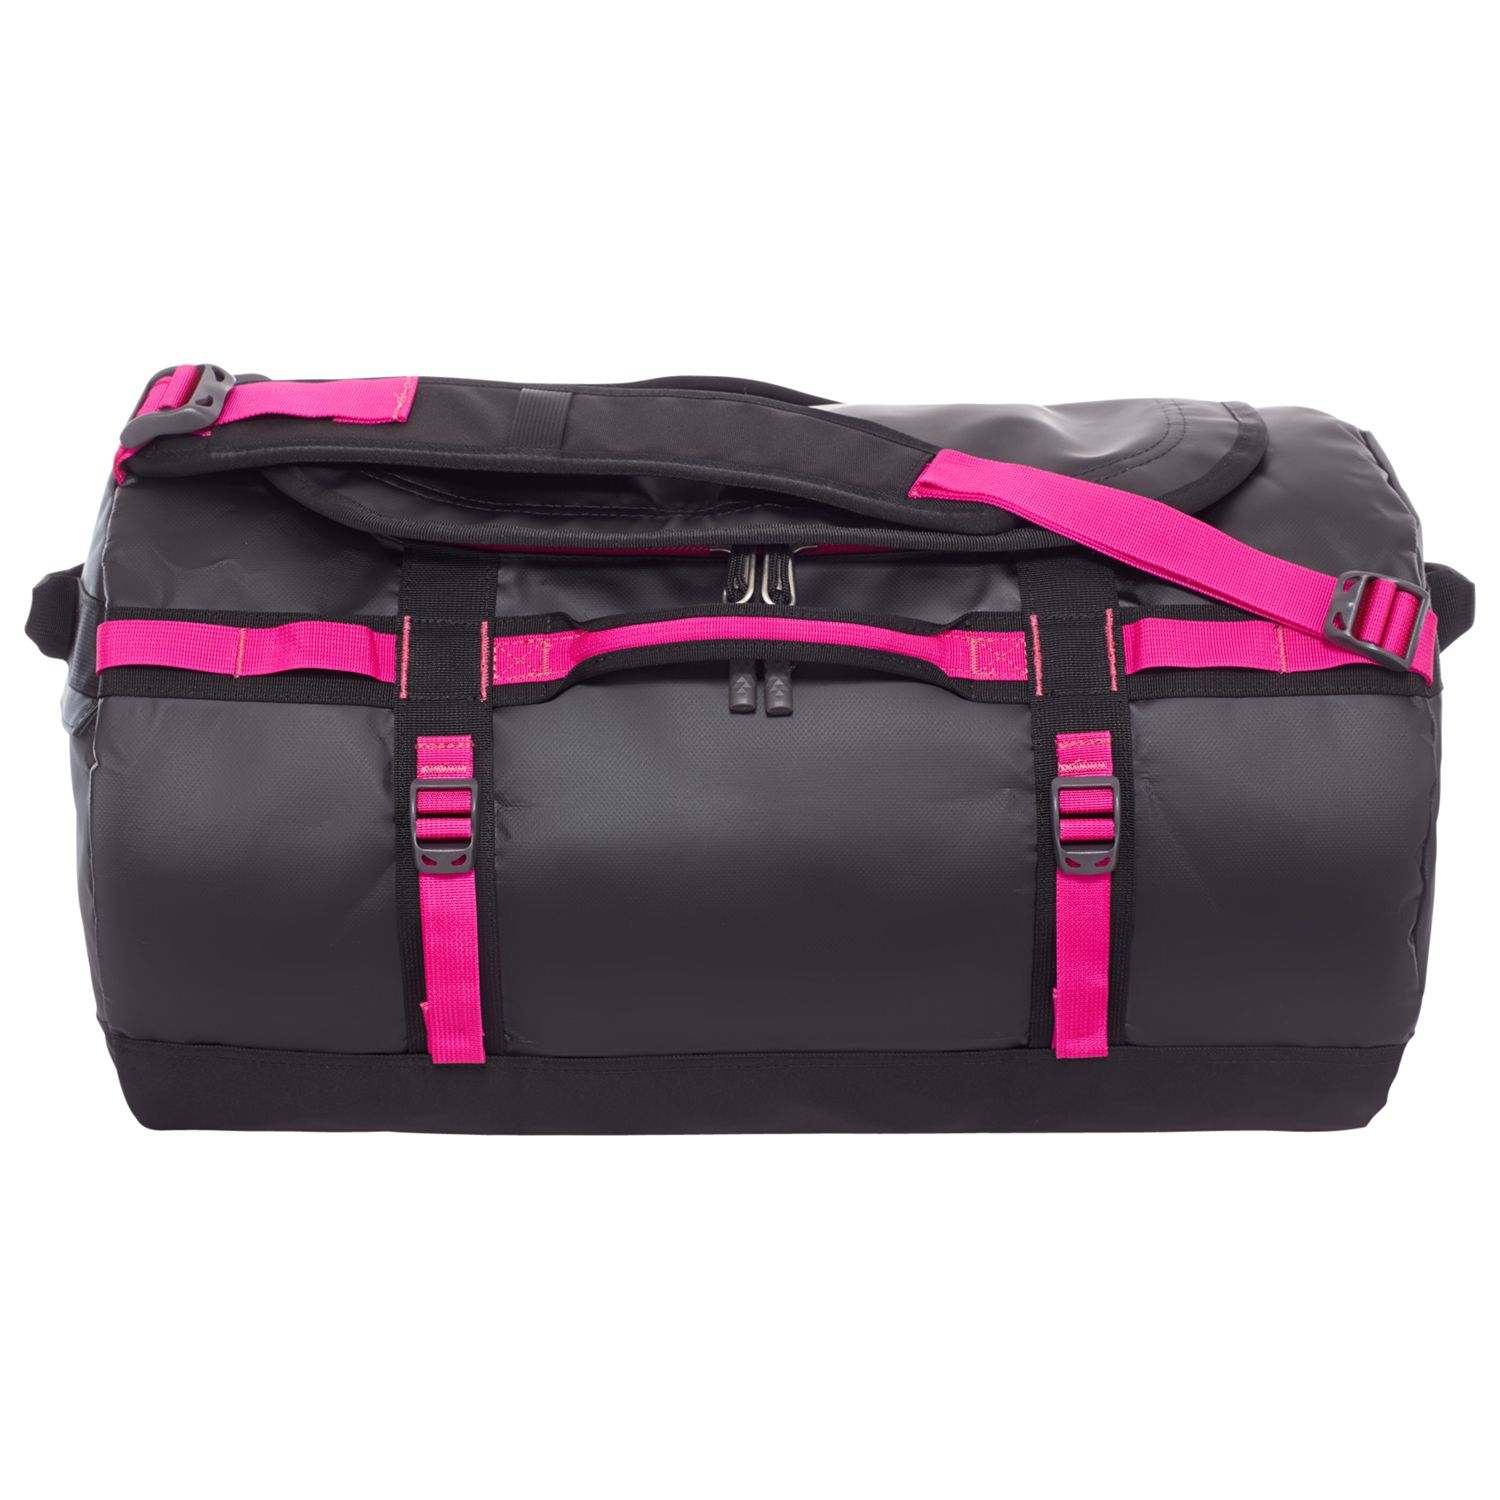 The North Face Camp Duffel Bag Small Black Super Pink At John Lewis Partners